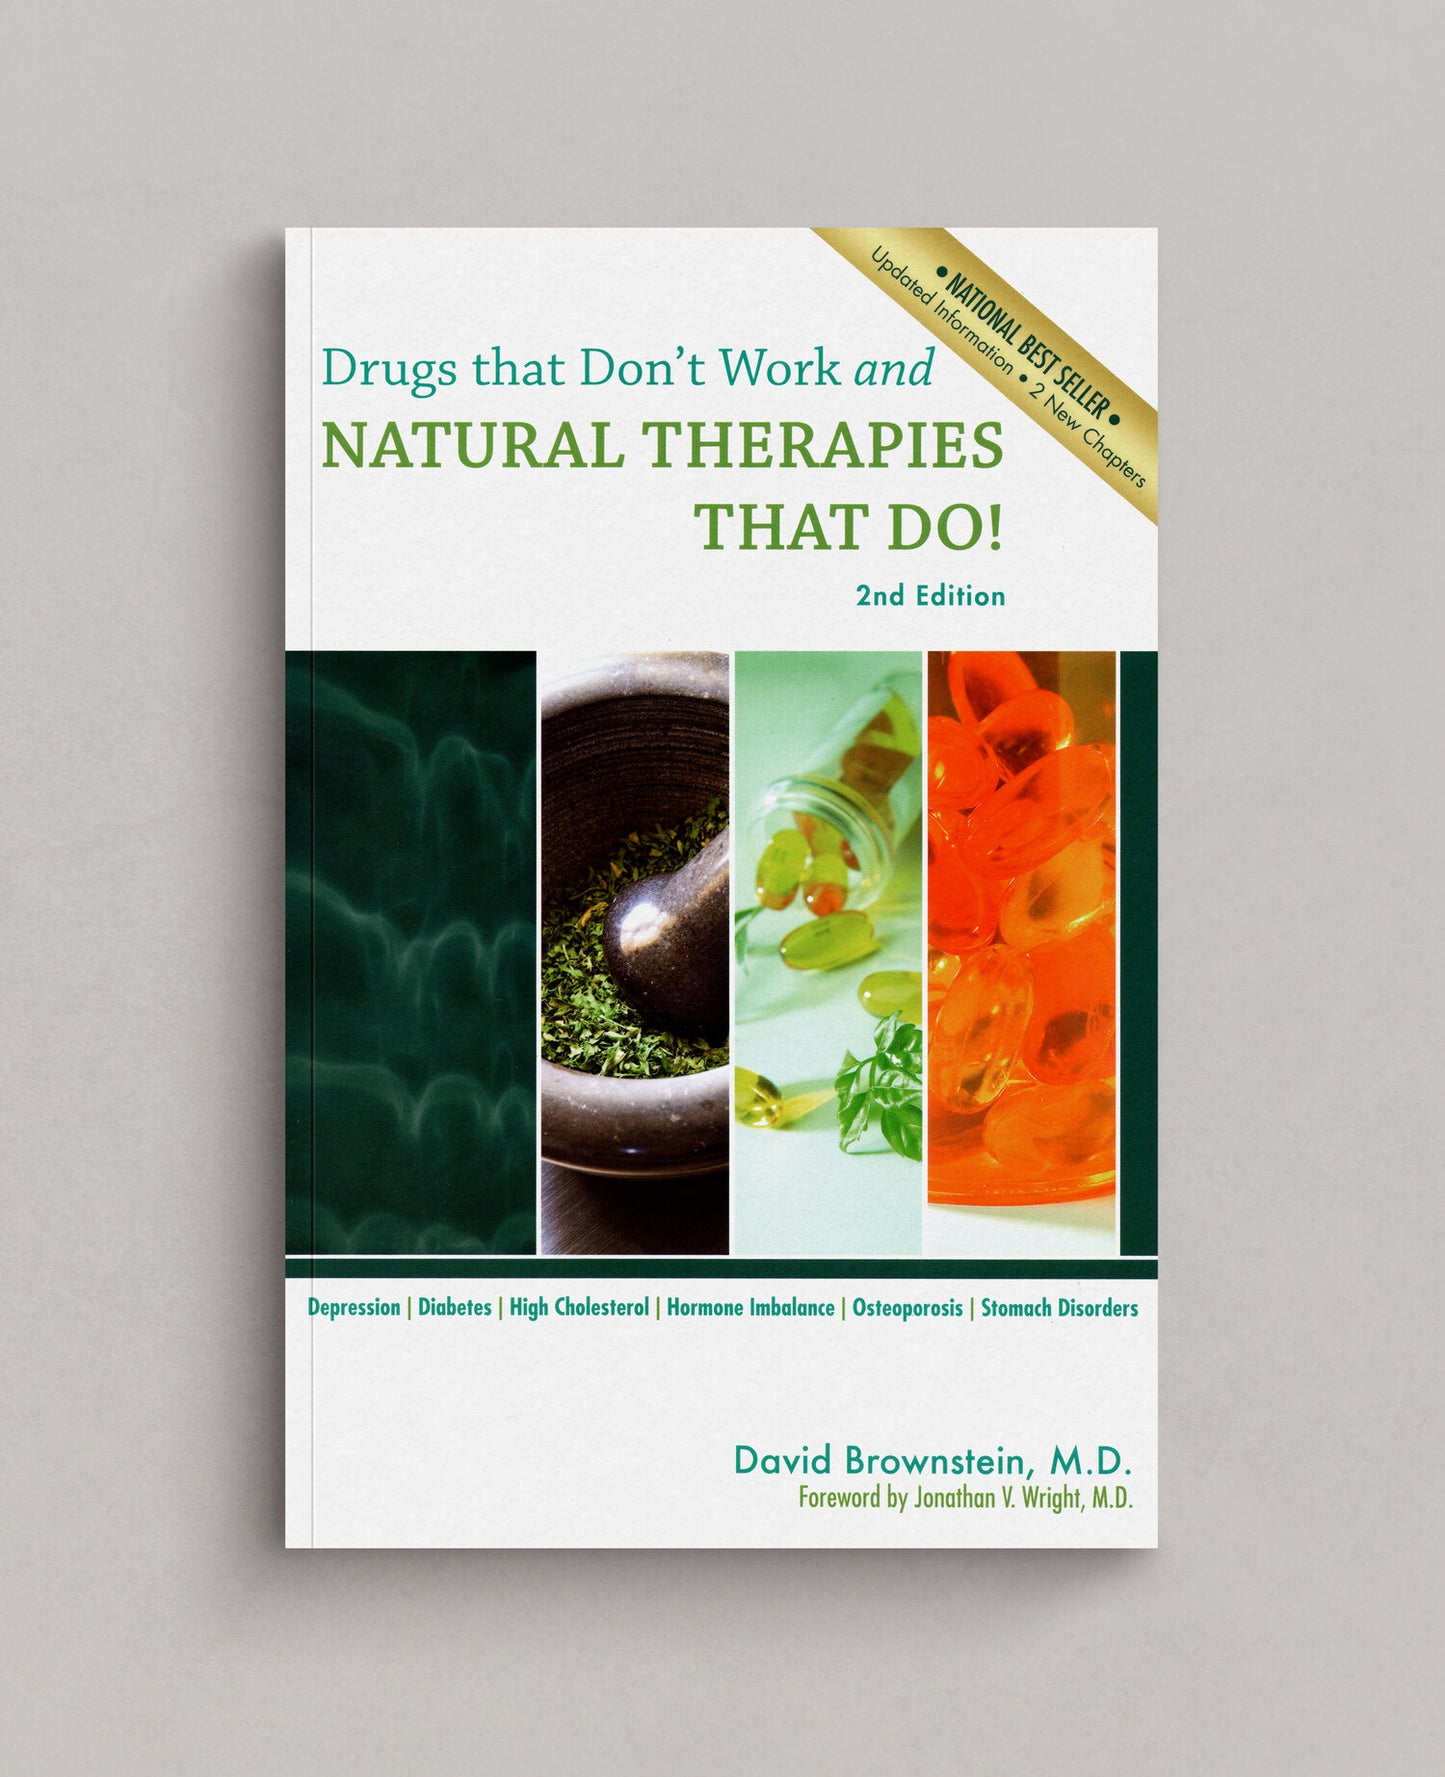 Drugs that Don't Work and Natural Therapies That Do